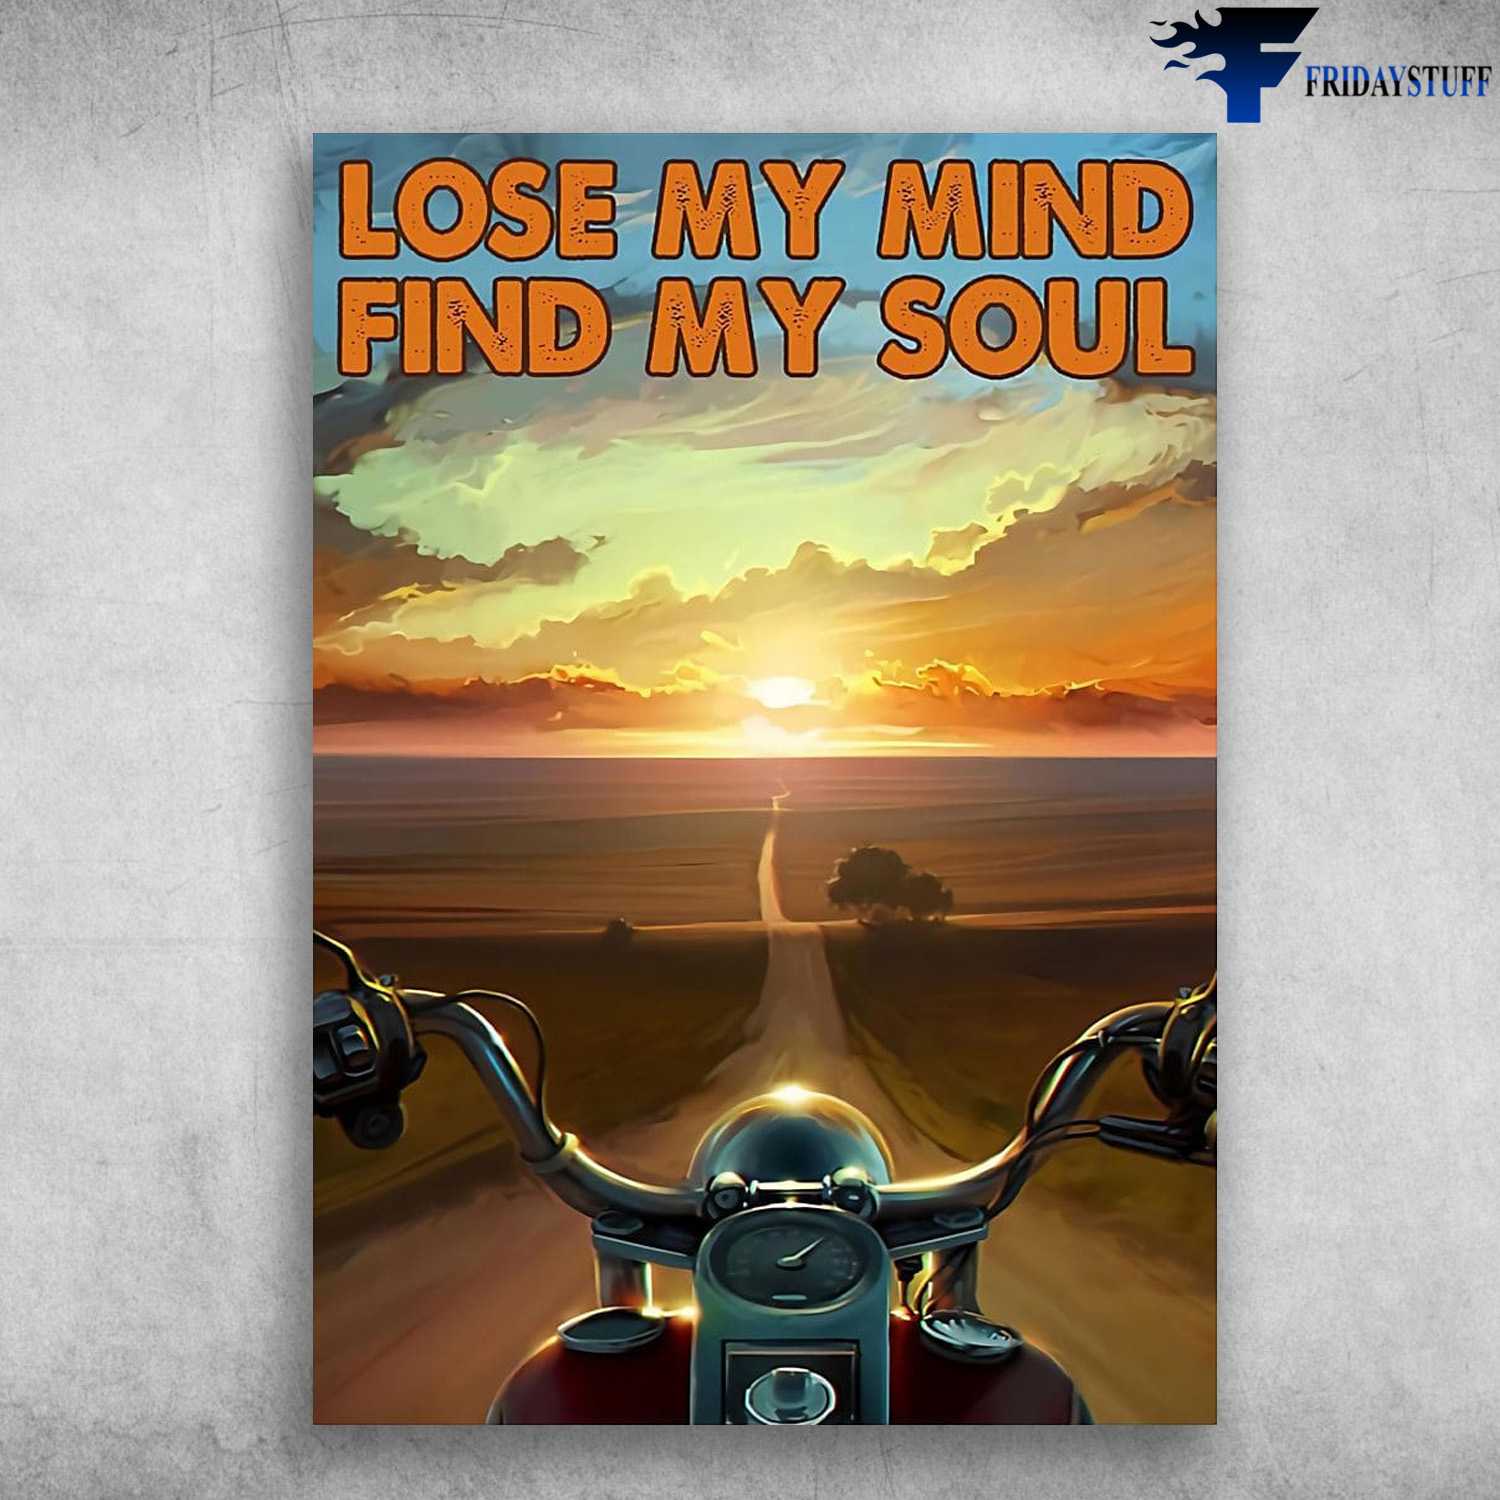 Rider Poster, Motorcycle Lover, Lose My Mind, Find My Soul